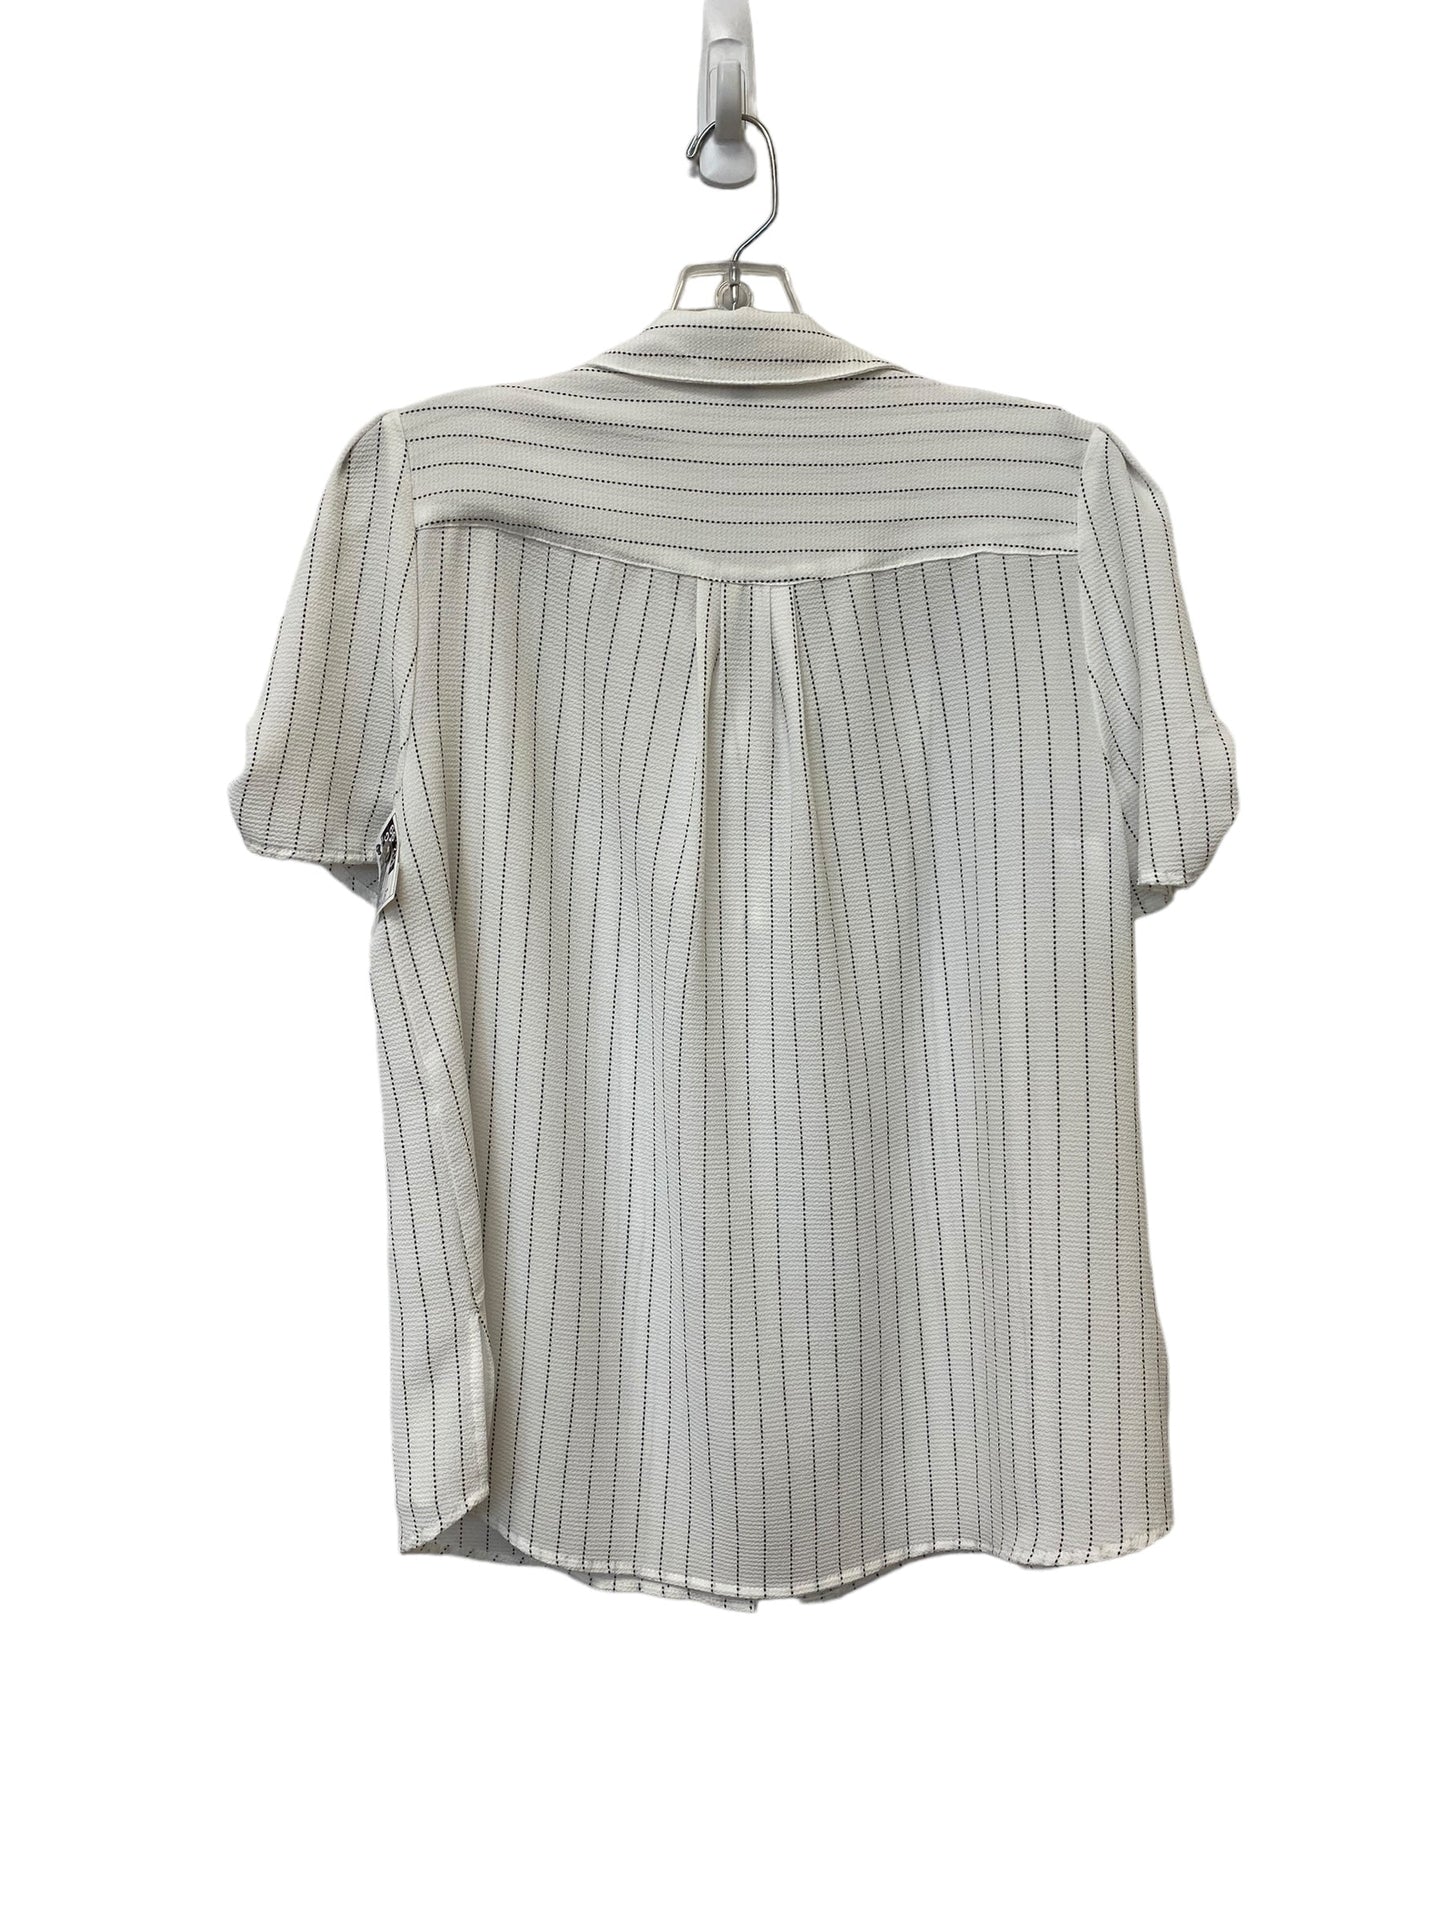 Striped Pattern Top Short Sleeve Adrianna Papell, Size S